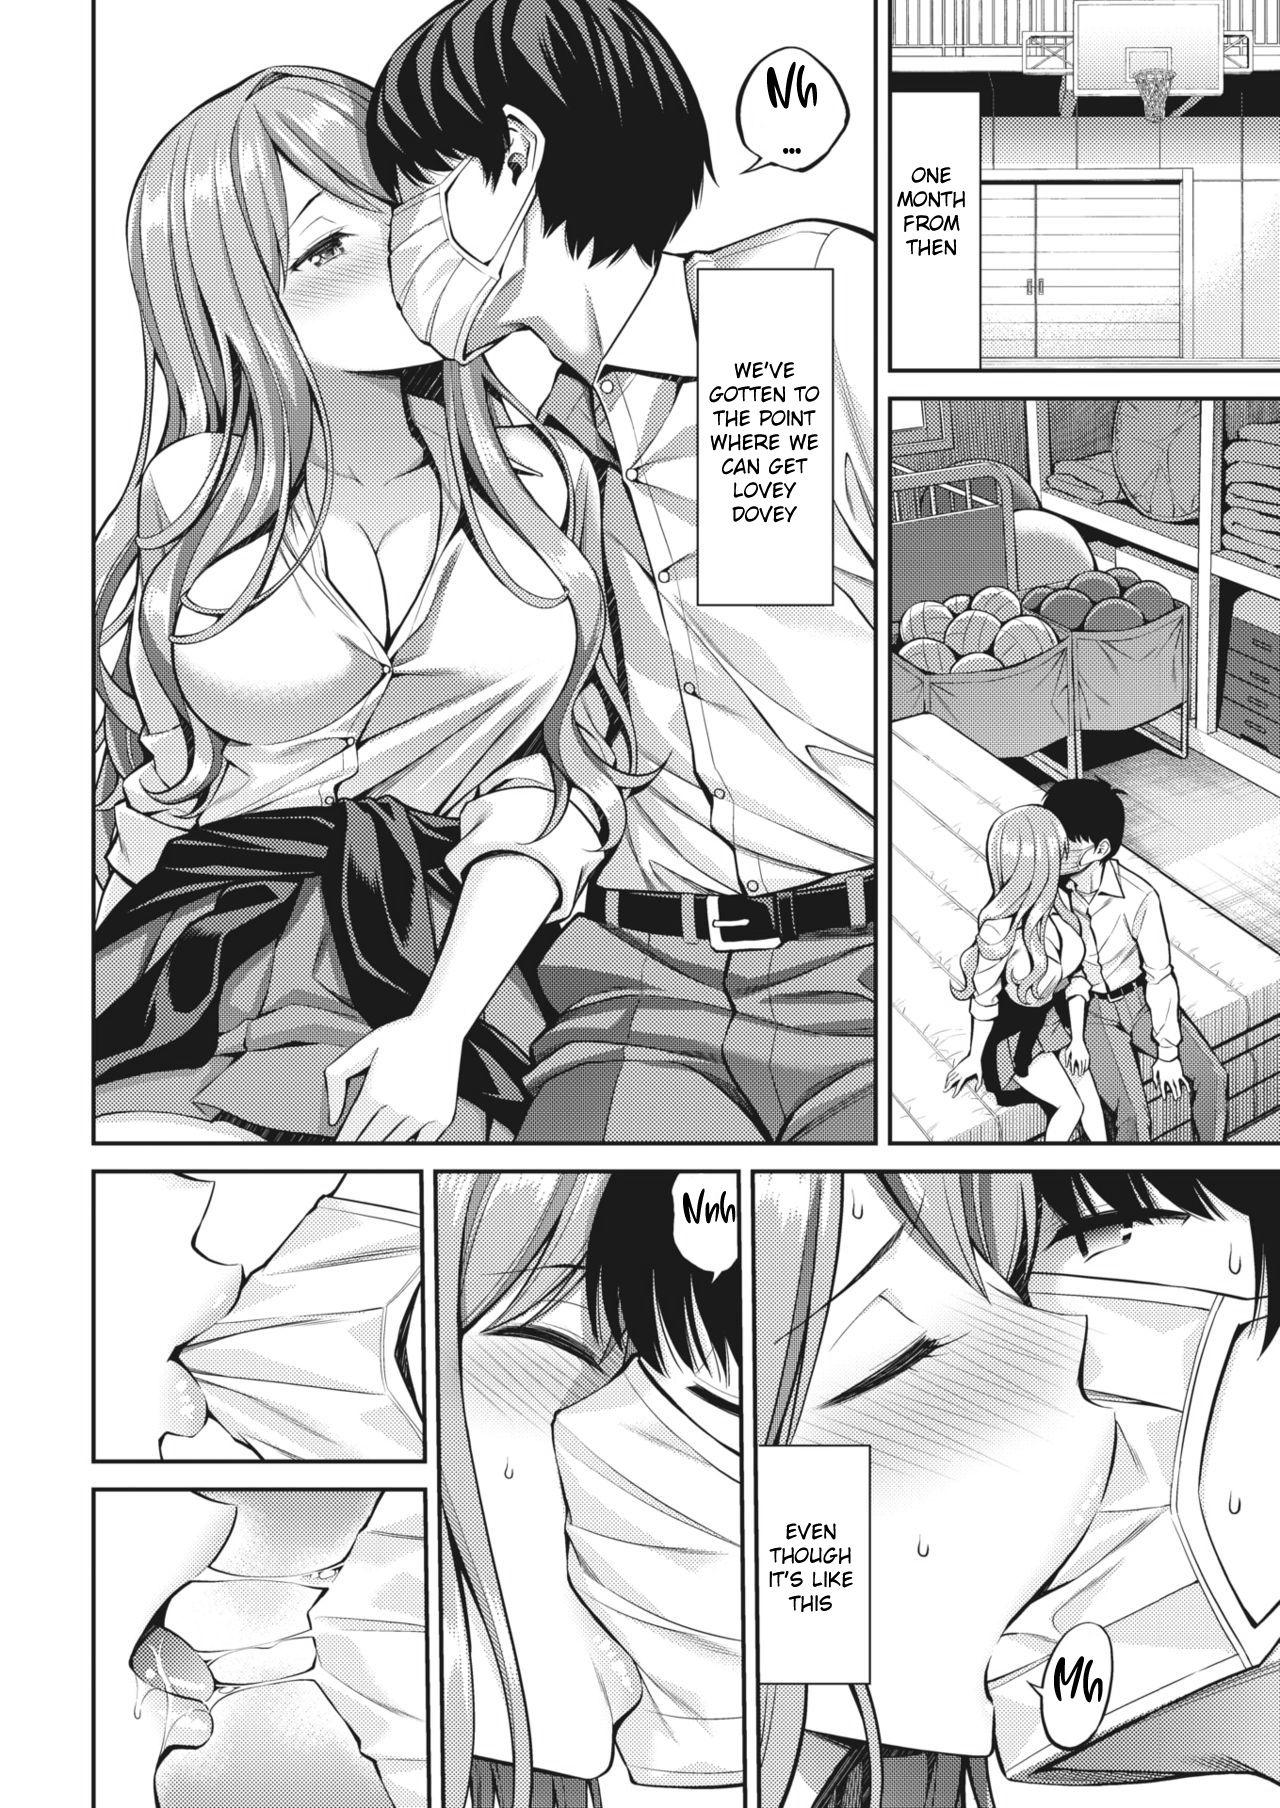 Workout Oblaat - Indirect kiss & sex & love - Original Groupfuck - Page 6